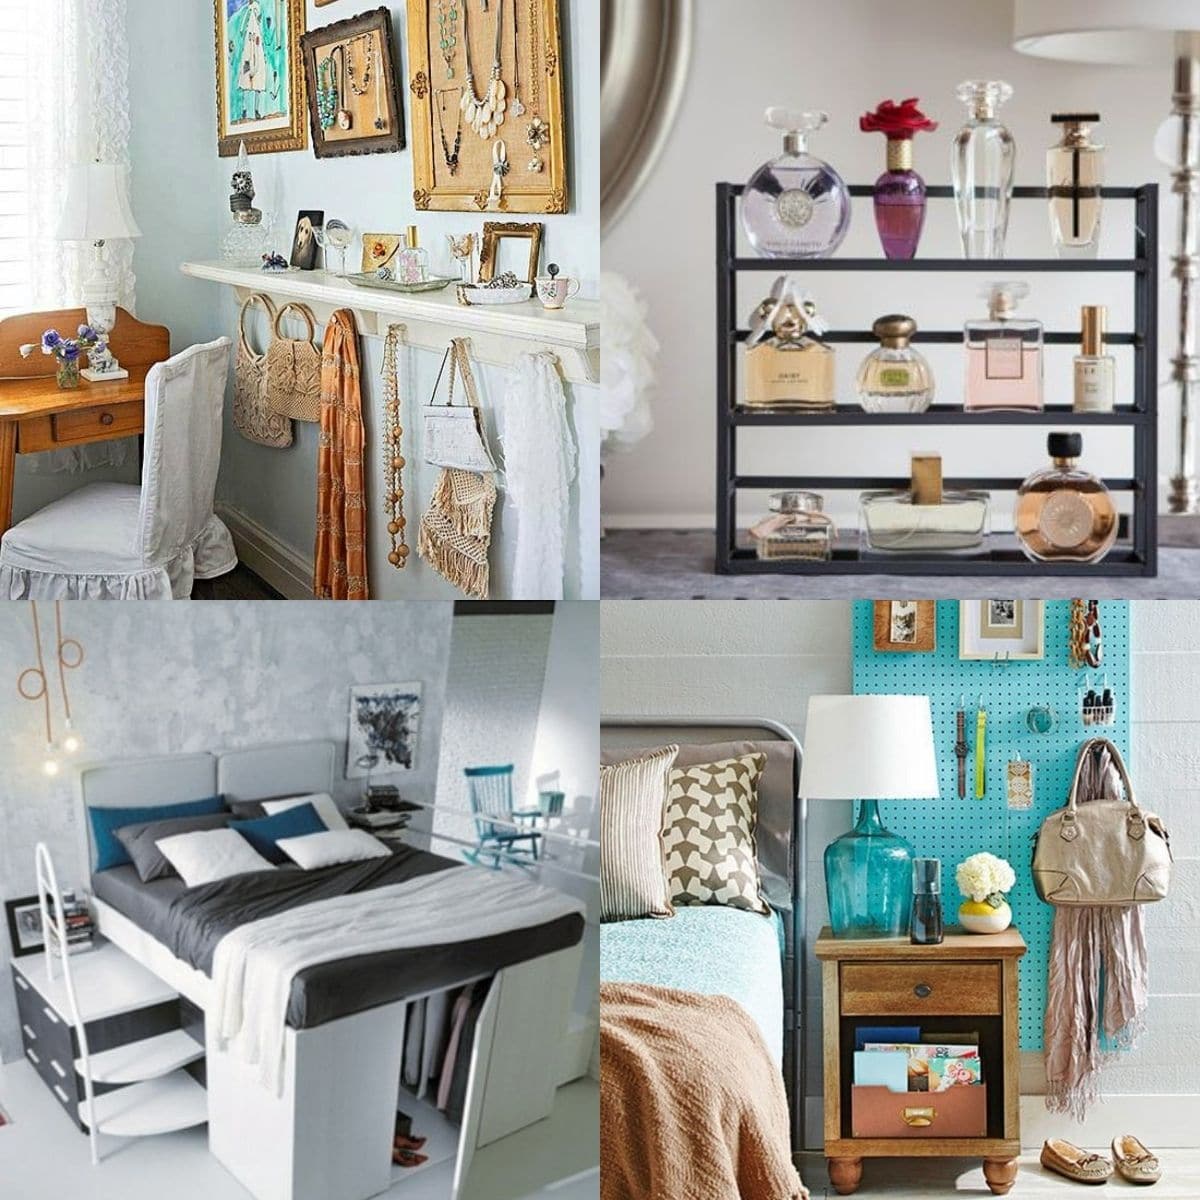 Increase storage in your small rooms with the fun hacks.

Keep your room both organized and stylish. 😉

#Storage #StorageIDeas #StorageSpace #SmallRooms #SmallRoomStorage #SmallRoomStorageIDeas

 LocalInfoForYou.com/155542/small-r…